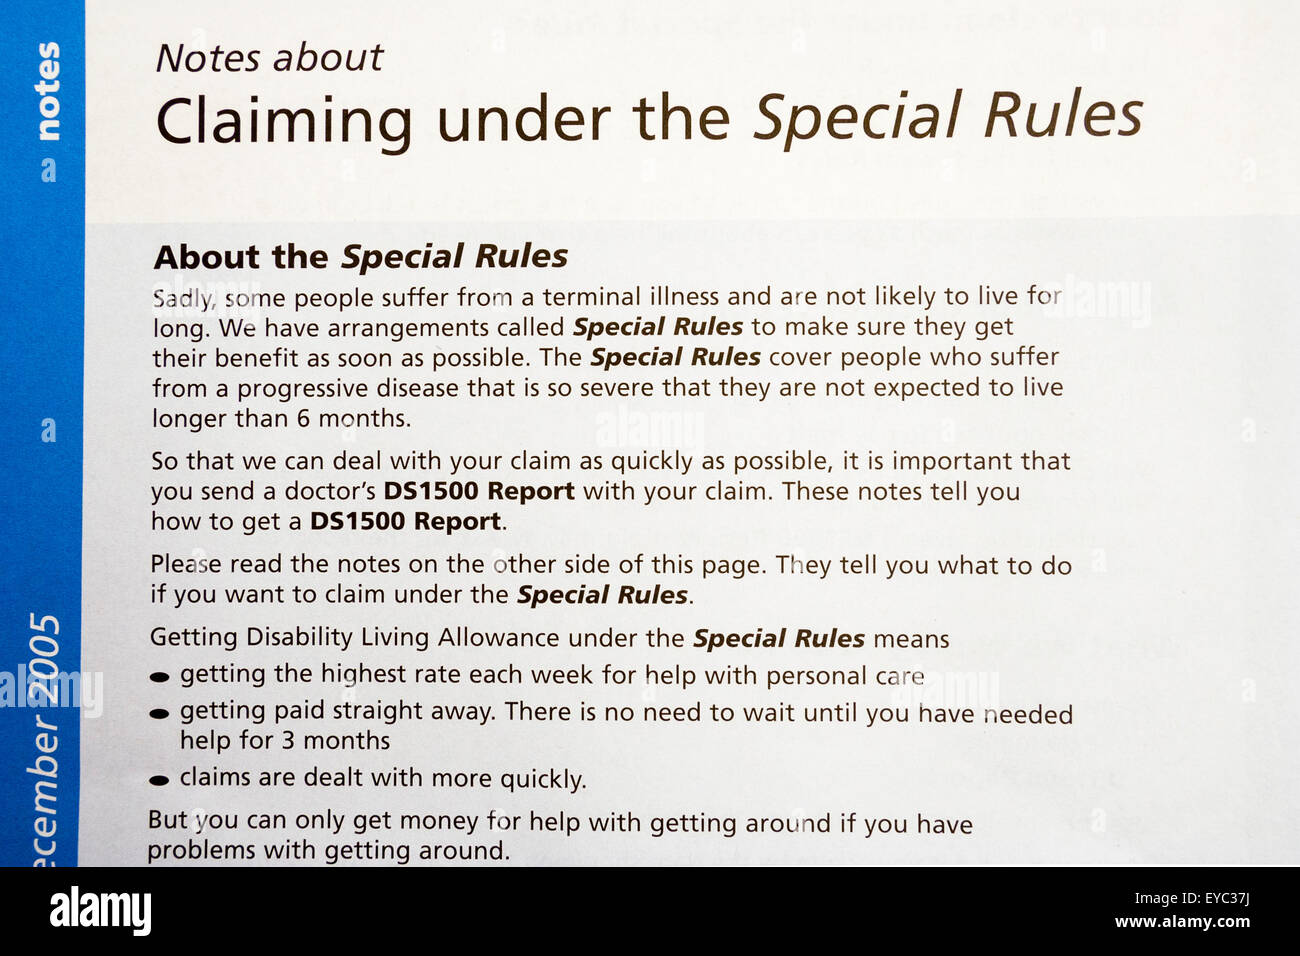 British state benefit, DWP, DLA leaflet for Claiming under special rules, terminally ill people. Front of leaflet with explanation of special rules. Stock Photo